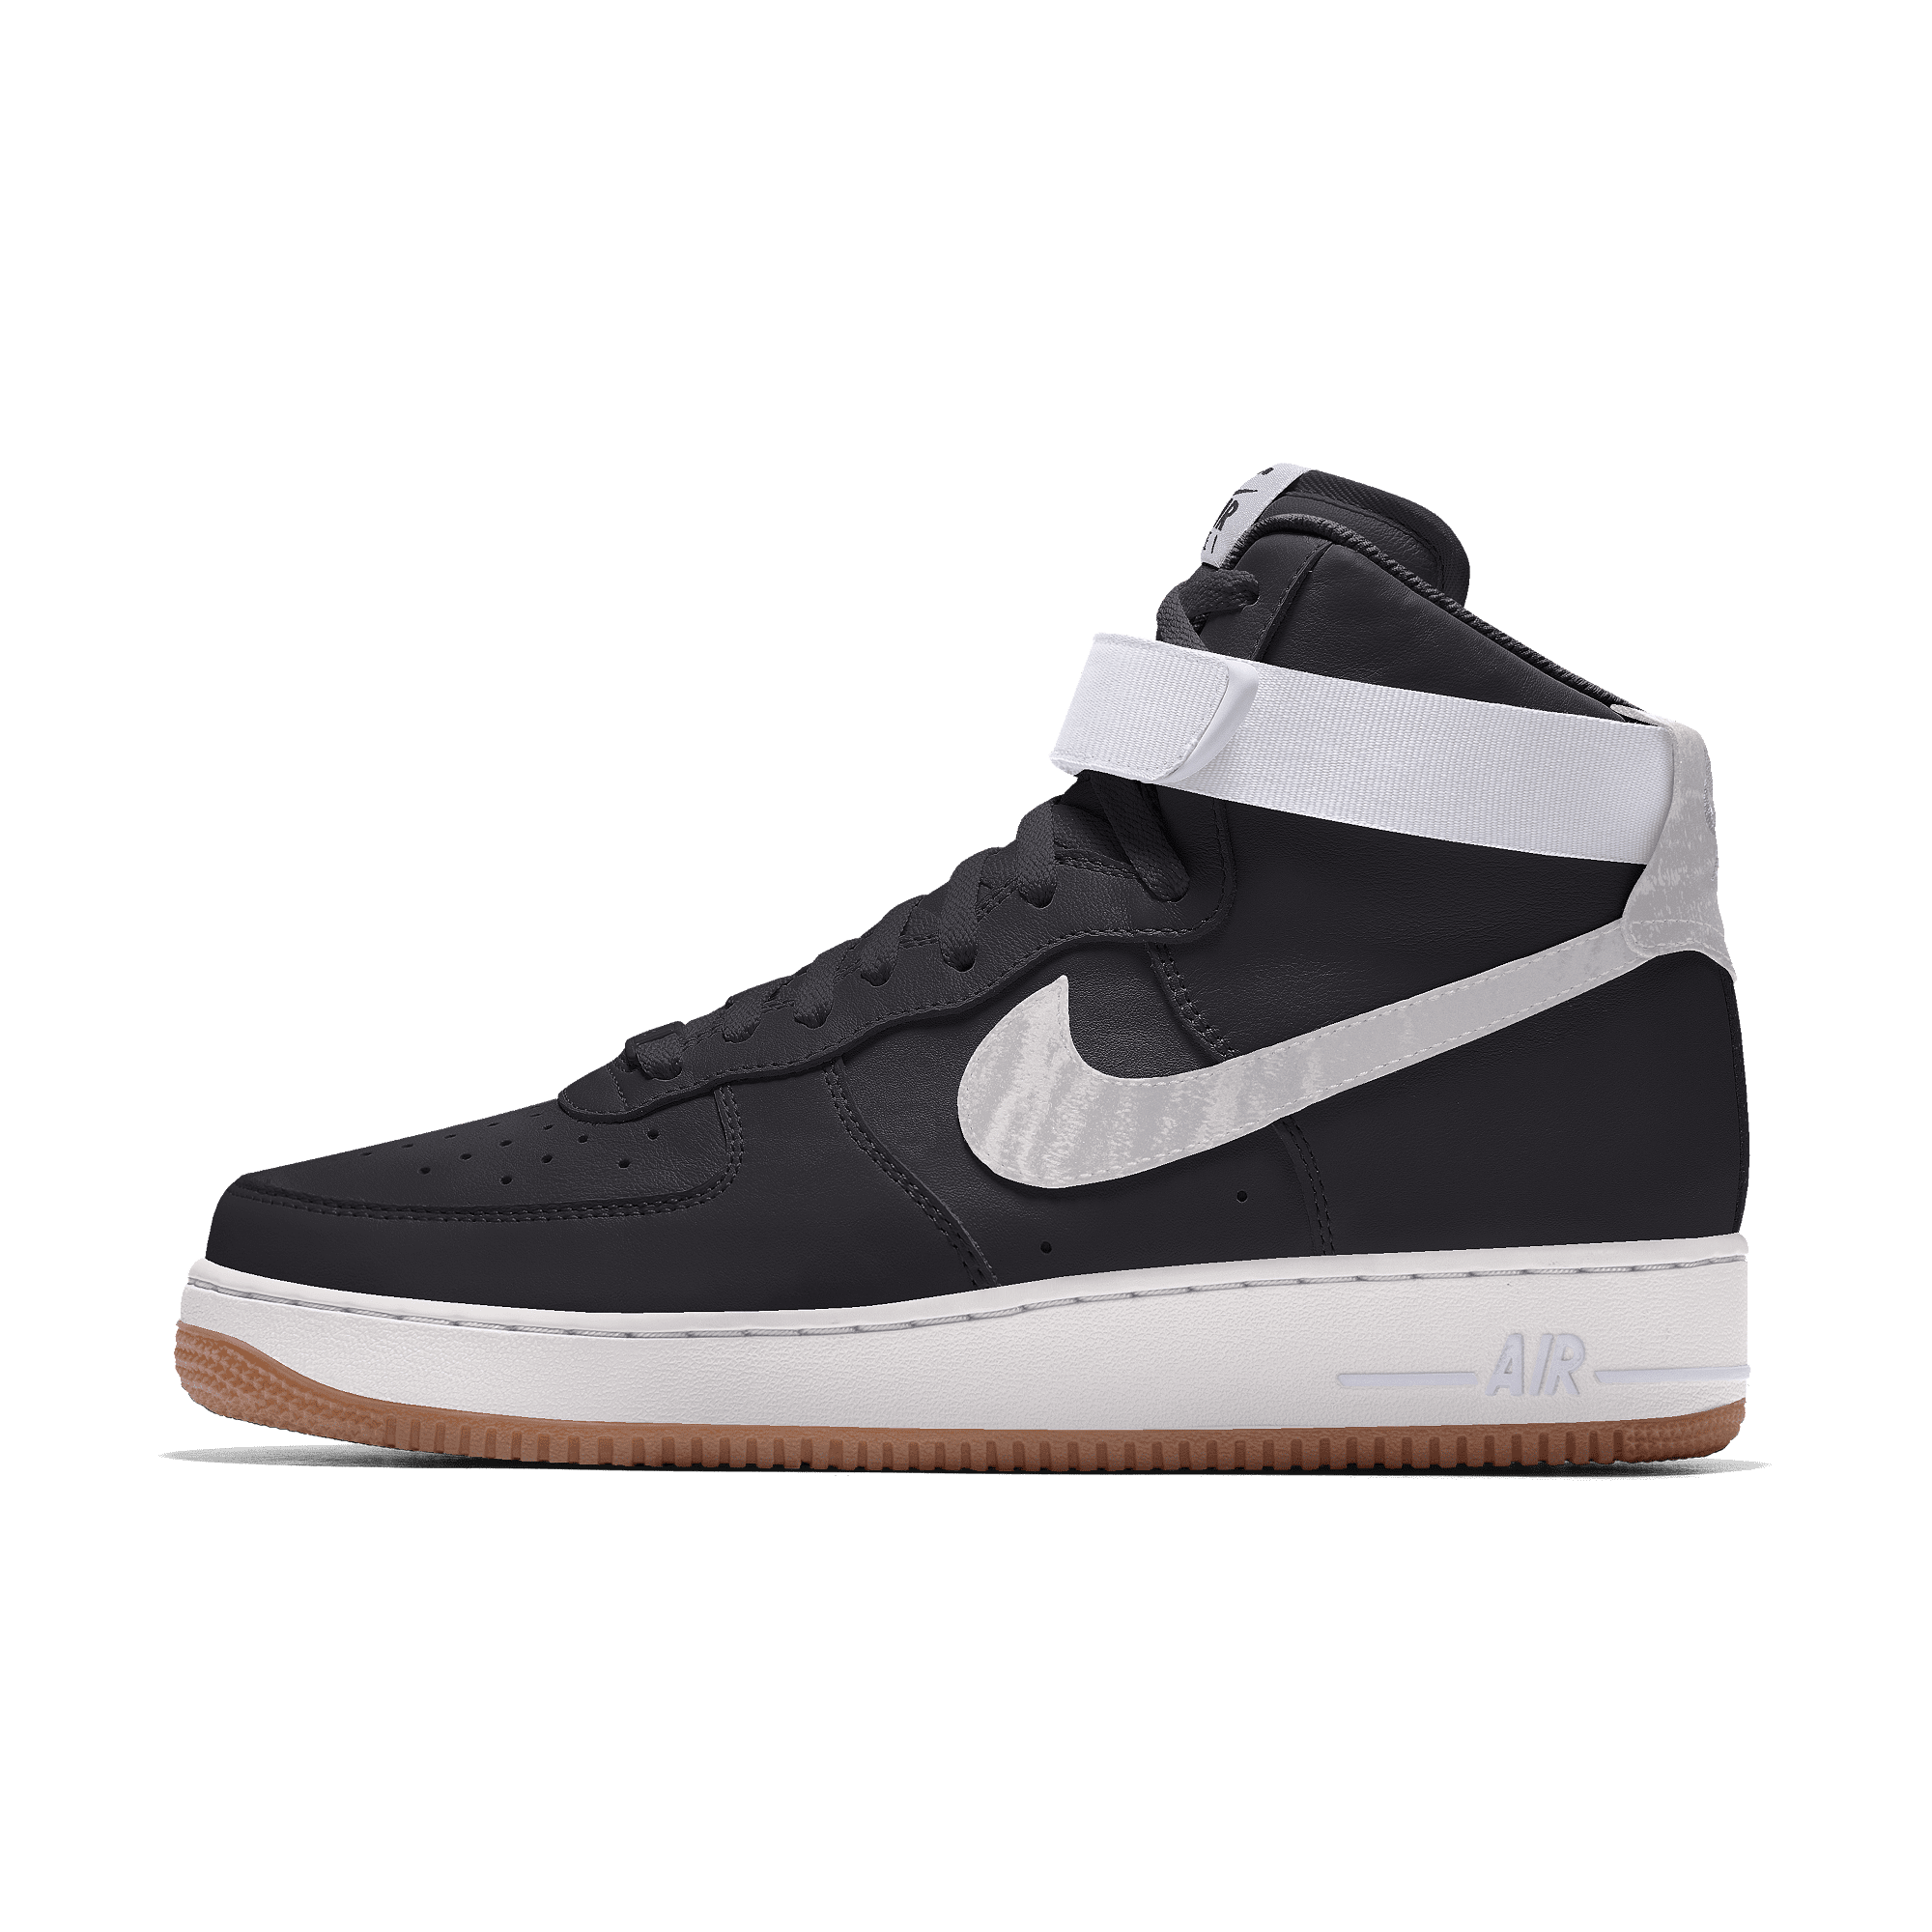 Scarpa personalizzabile Nike Air Force 1 High By You – Uomo - Nero